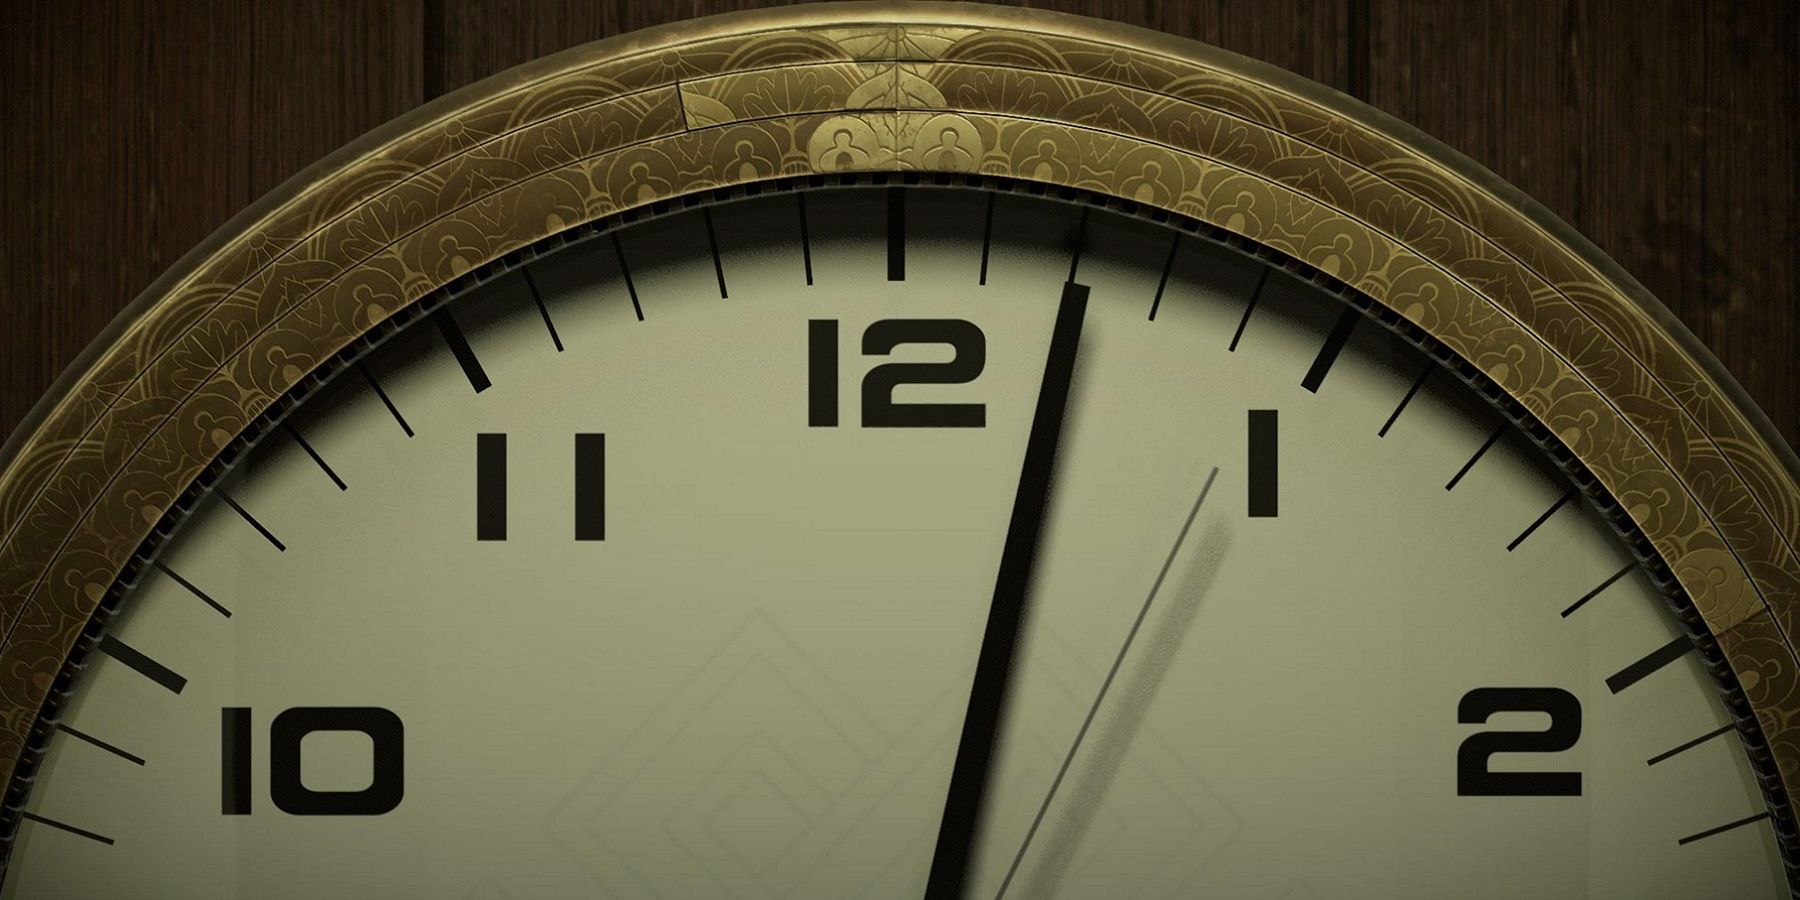 Image from 12 Minutes showing a close-up of a clock face.